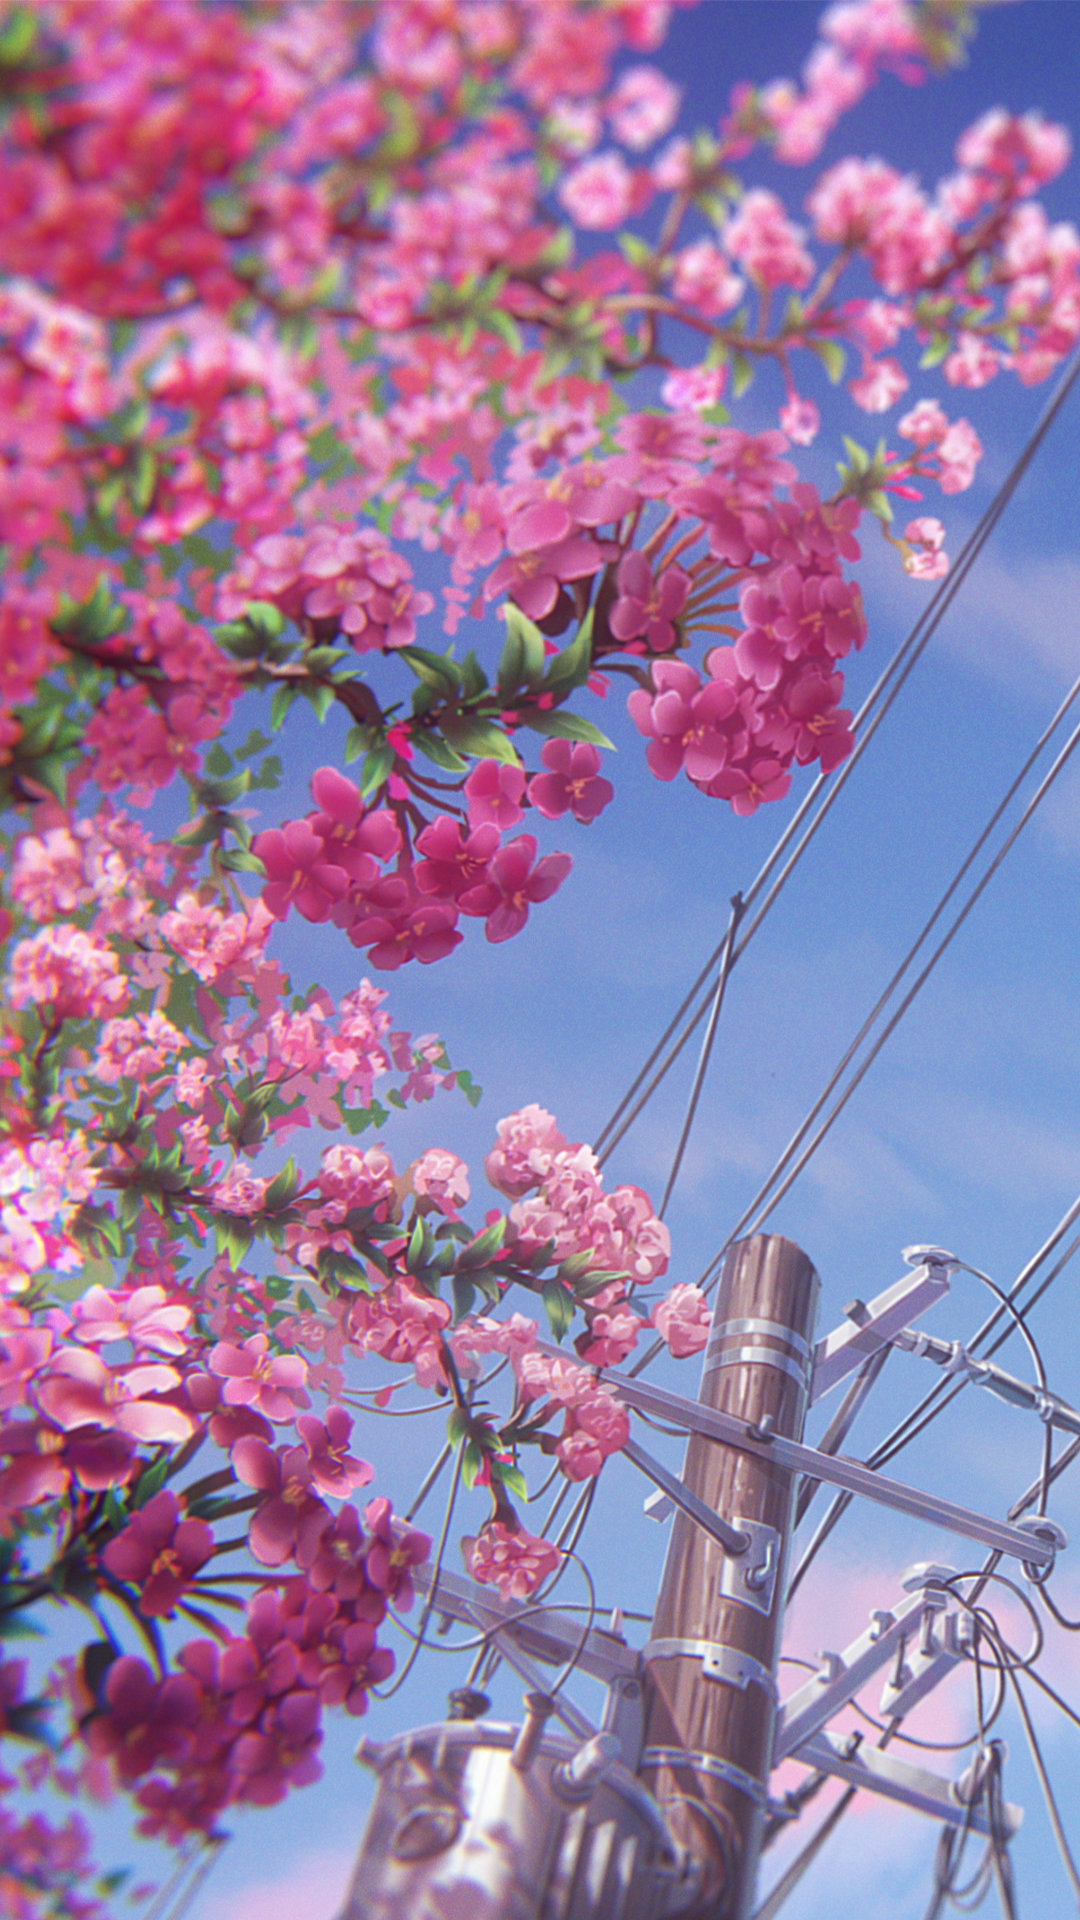 Flowers Wires Worms Eye View Low Angle Pink Flowers Vertical Video Game Art Video Games 1080x1920